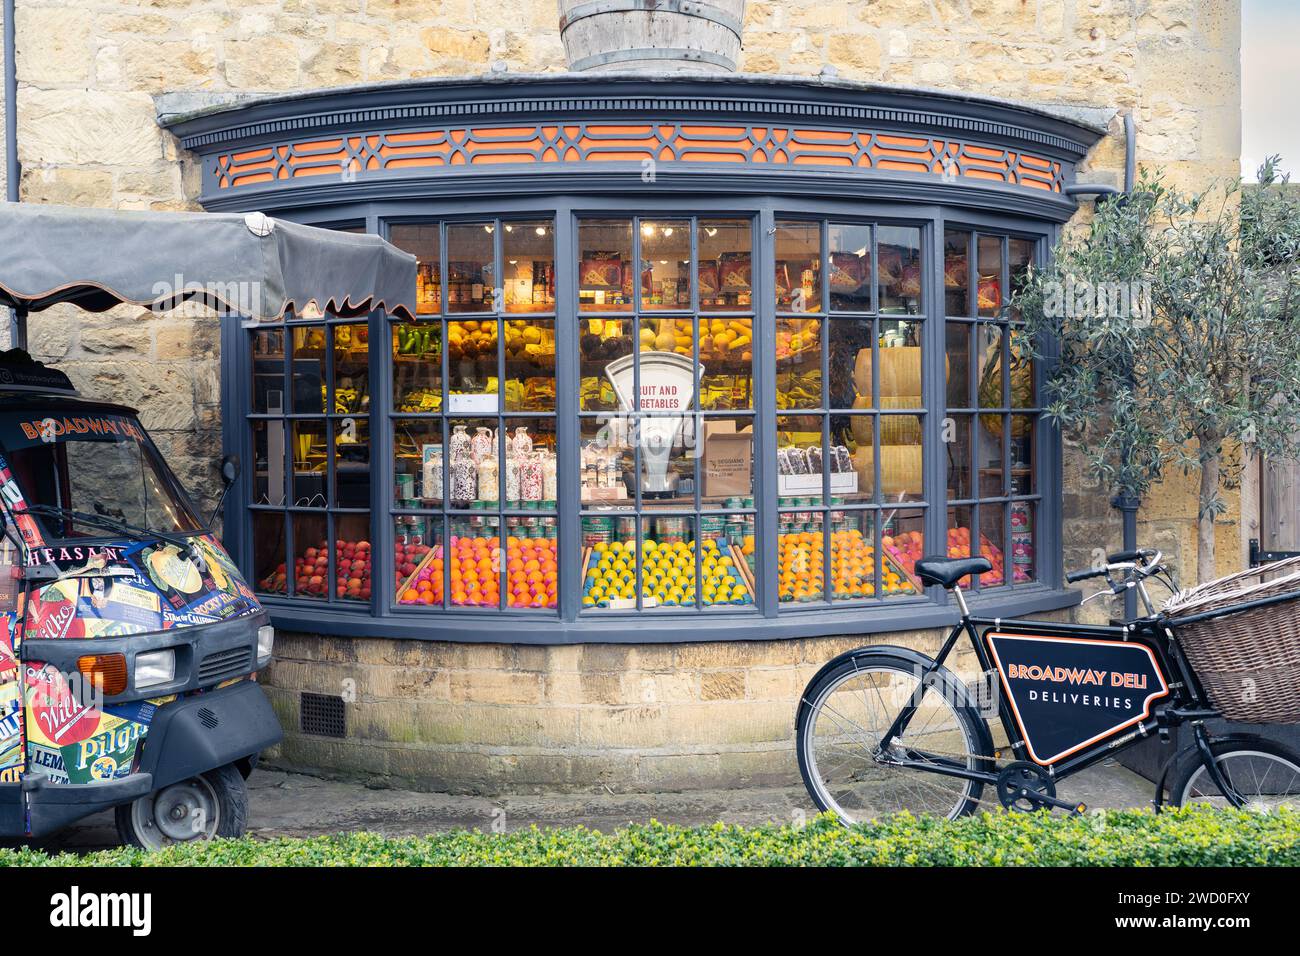 Fruit and vegetables and an old fashioned weighing scale in the window of the Broadway Deli, with a delivery bicycle outside. Broadway Stock Photo